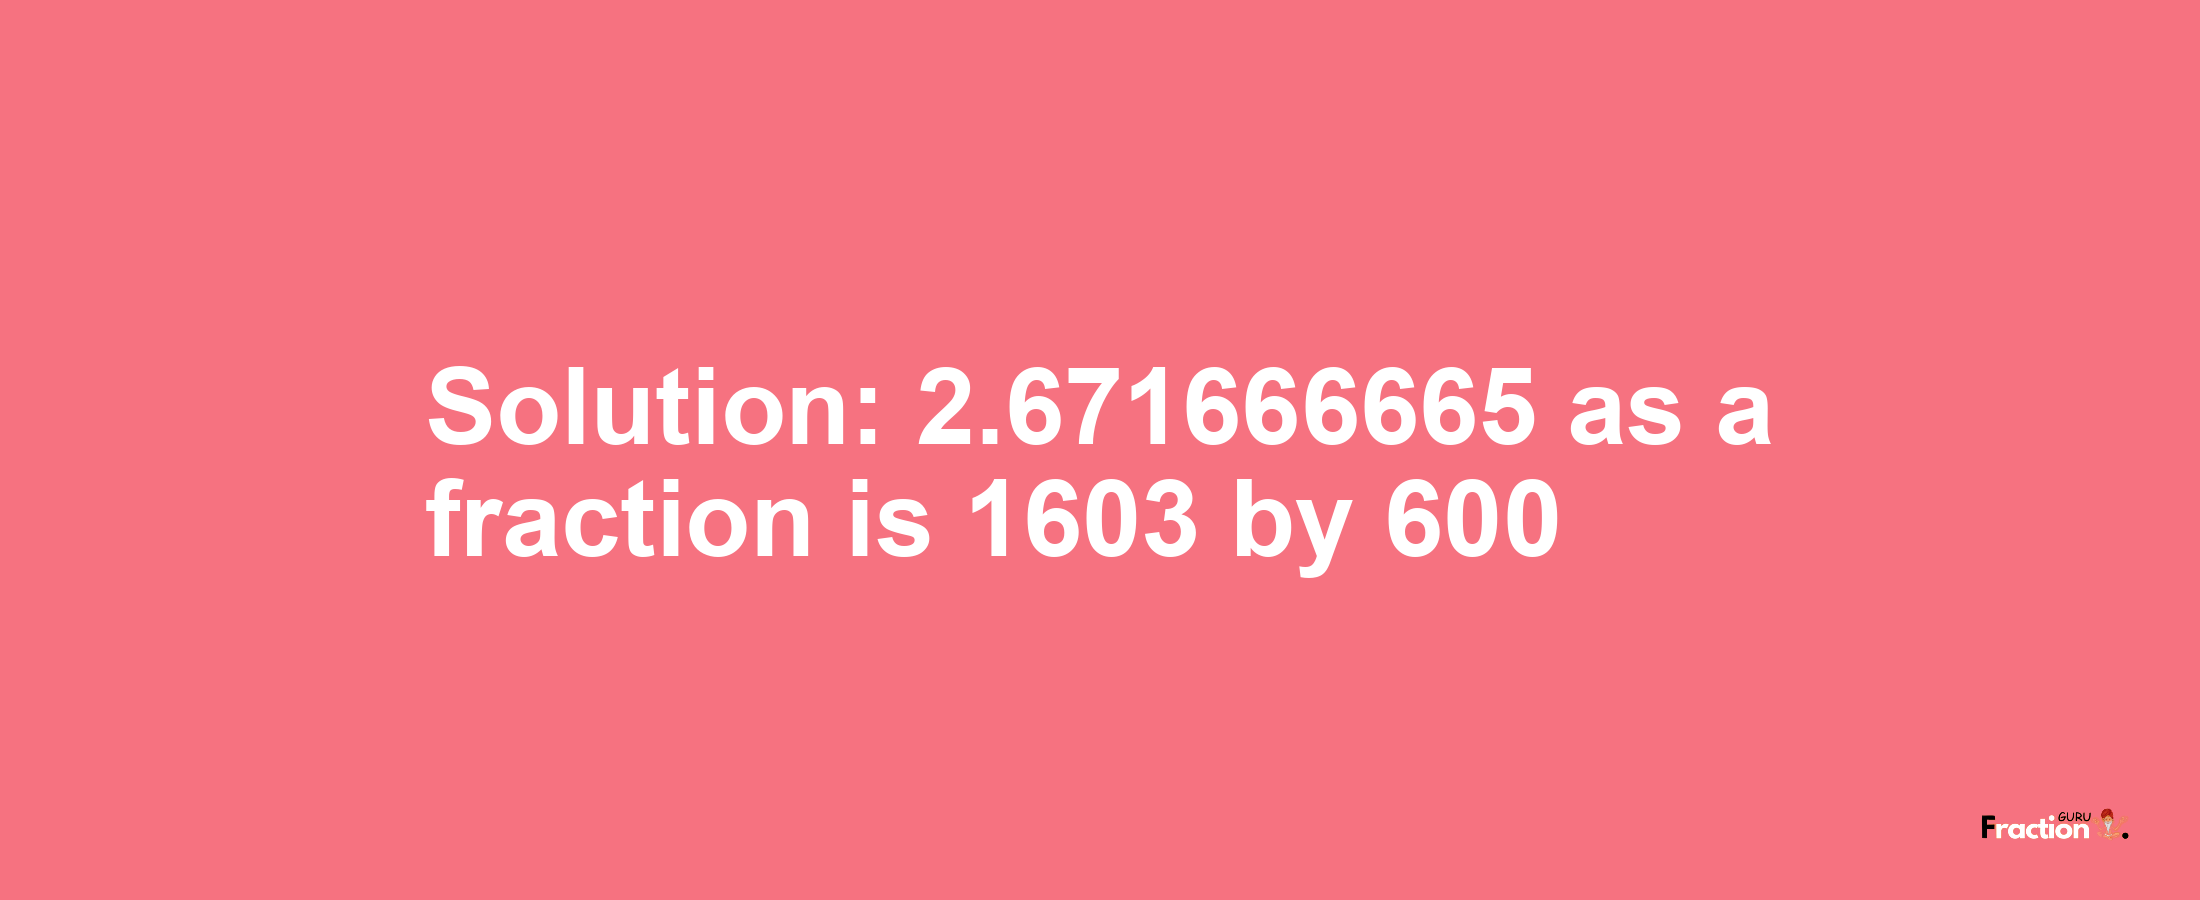 Solution:2.671666665 as a fraction is 1603/600